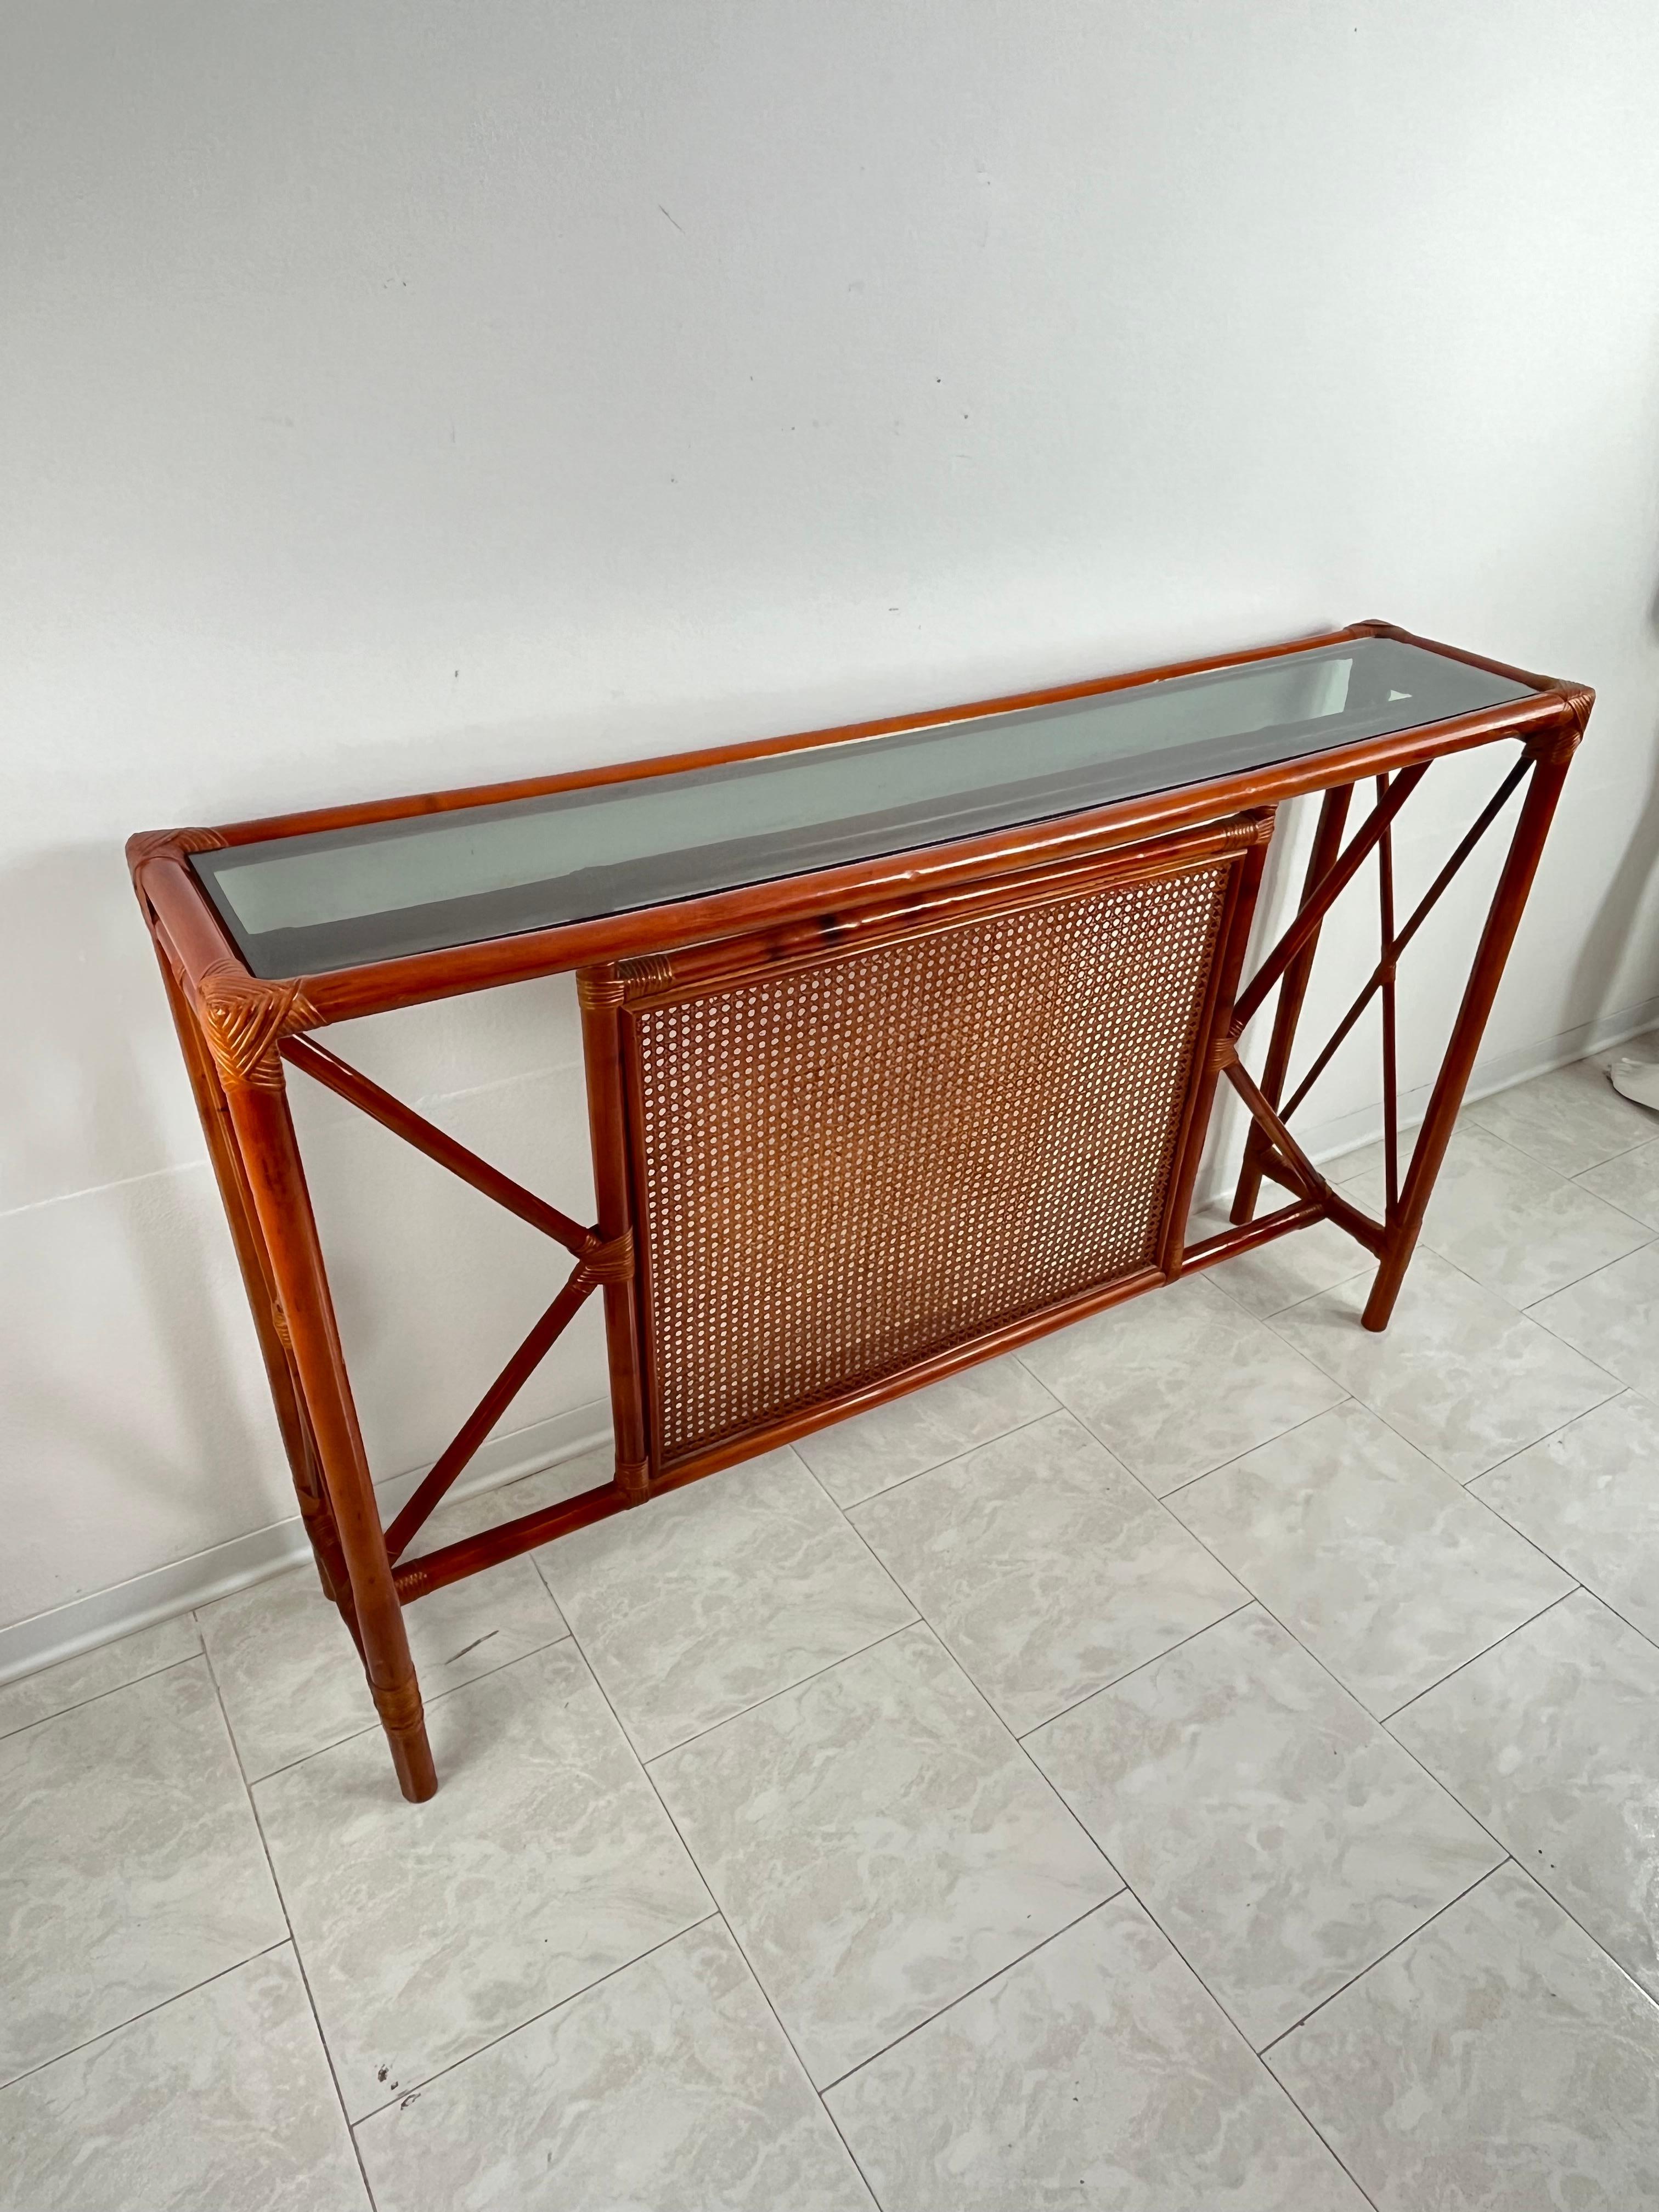 Set of 2 Bamboo and Rattan Console and Mirror Attributed to Franco Albini 1960s For Sale 4